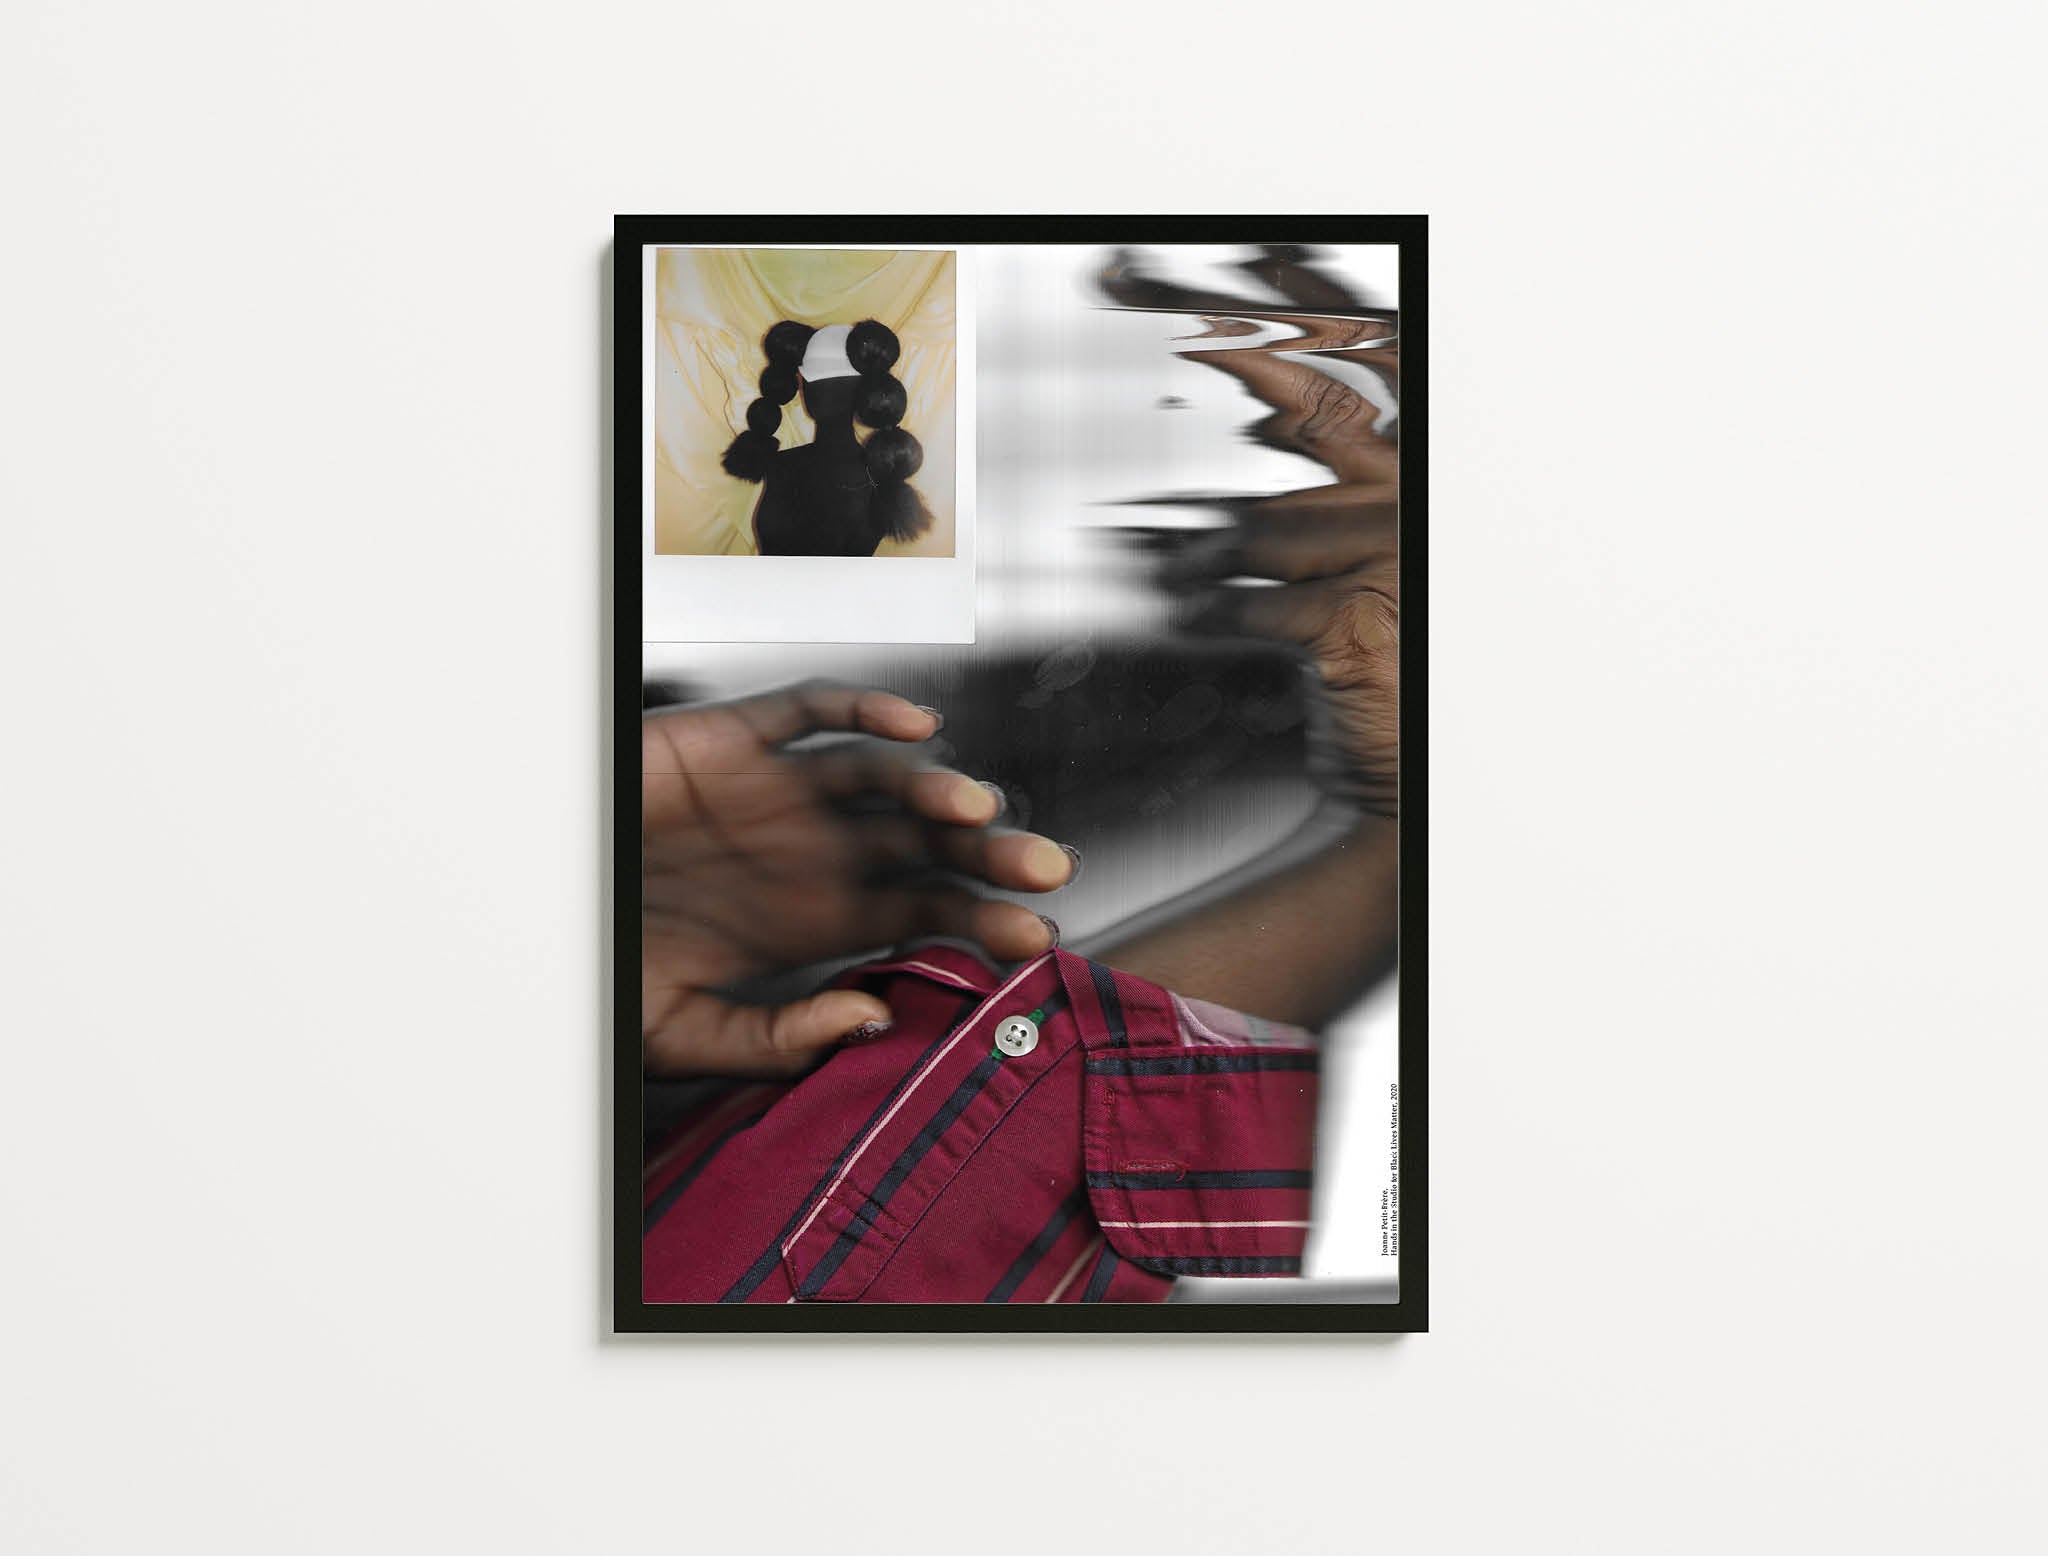 Hands In The Studio For All, Black Lives Matter, Print Ain't Dead Edition - Of Original Work, Studio Hands #2 (Featuring Polaroid Of "Bomb Duality" Crown), 2020